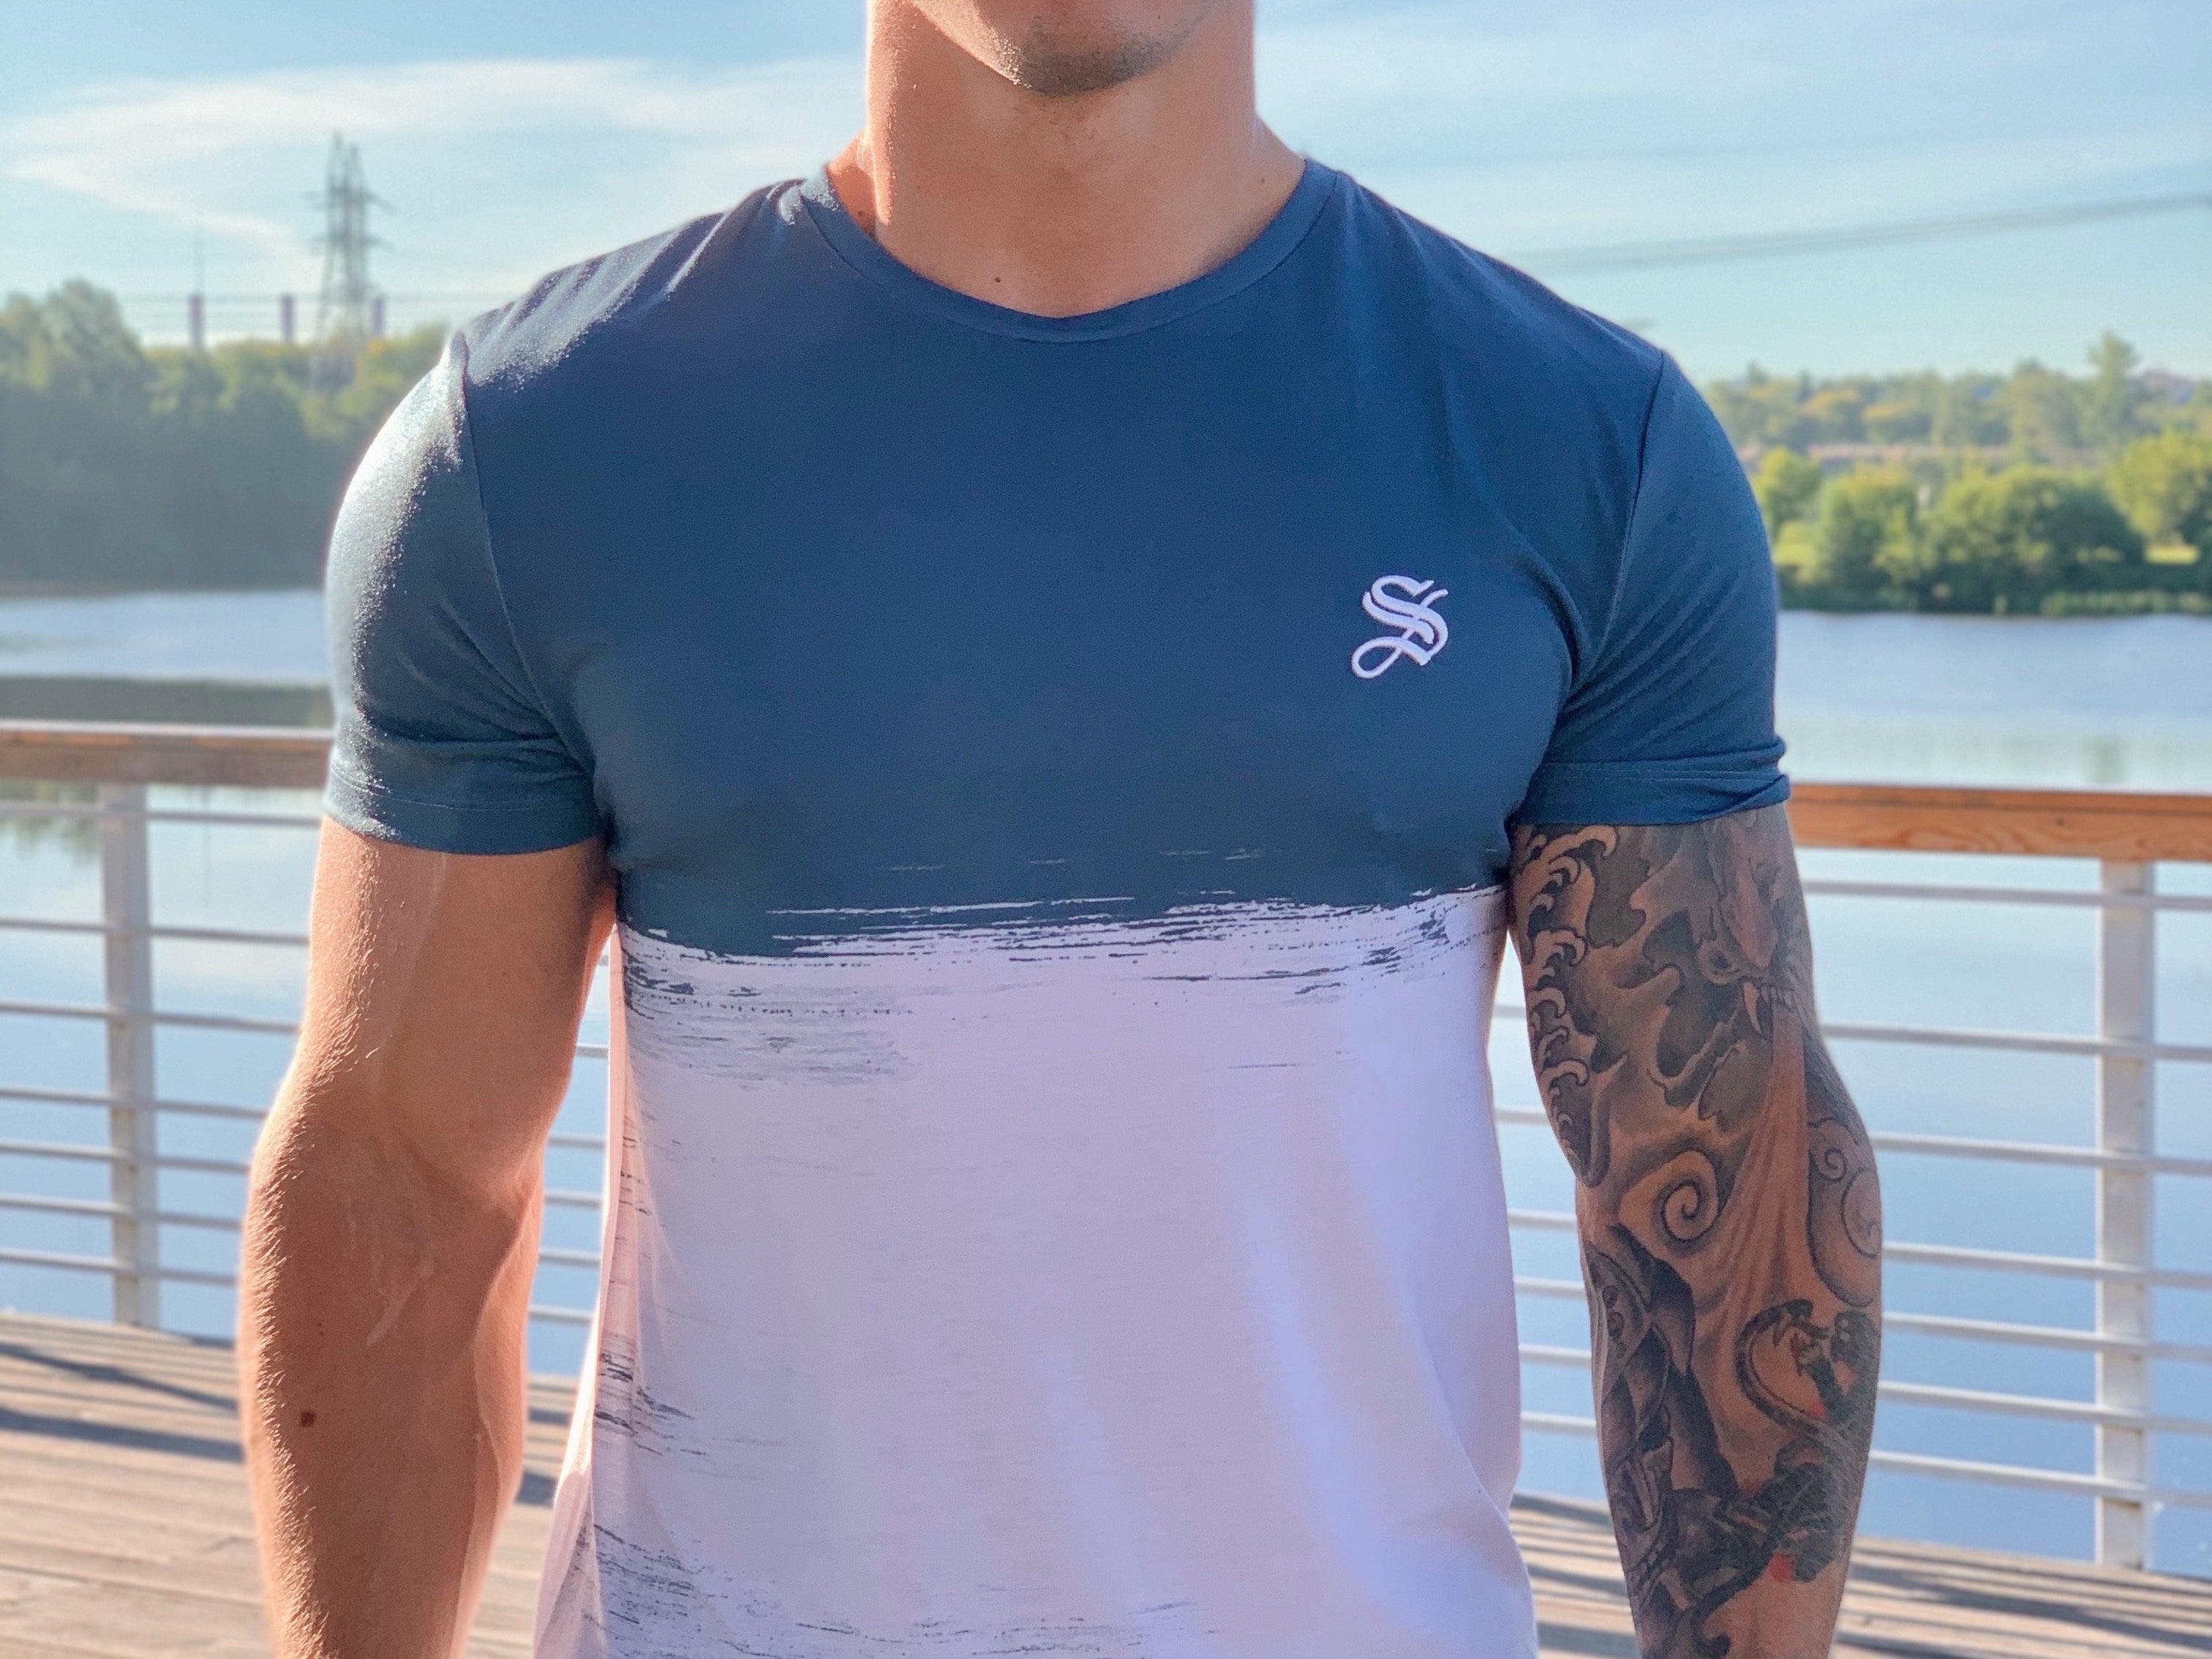 Polar Bear - Blue T-shirt for Men (PRE-ORDER DISPATCH DATE 25 SEPTEMBER) - Sarman Fashion - Wholesale Clothing Fashion Brand for Men from Canada